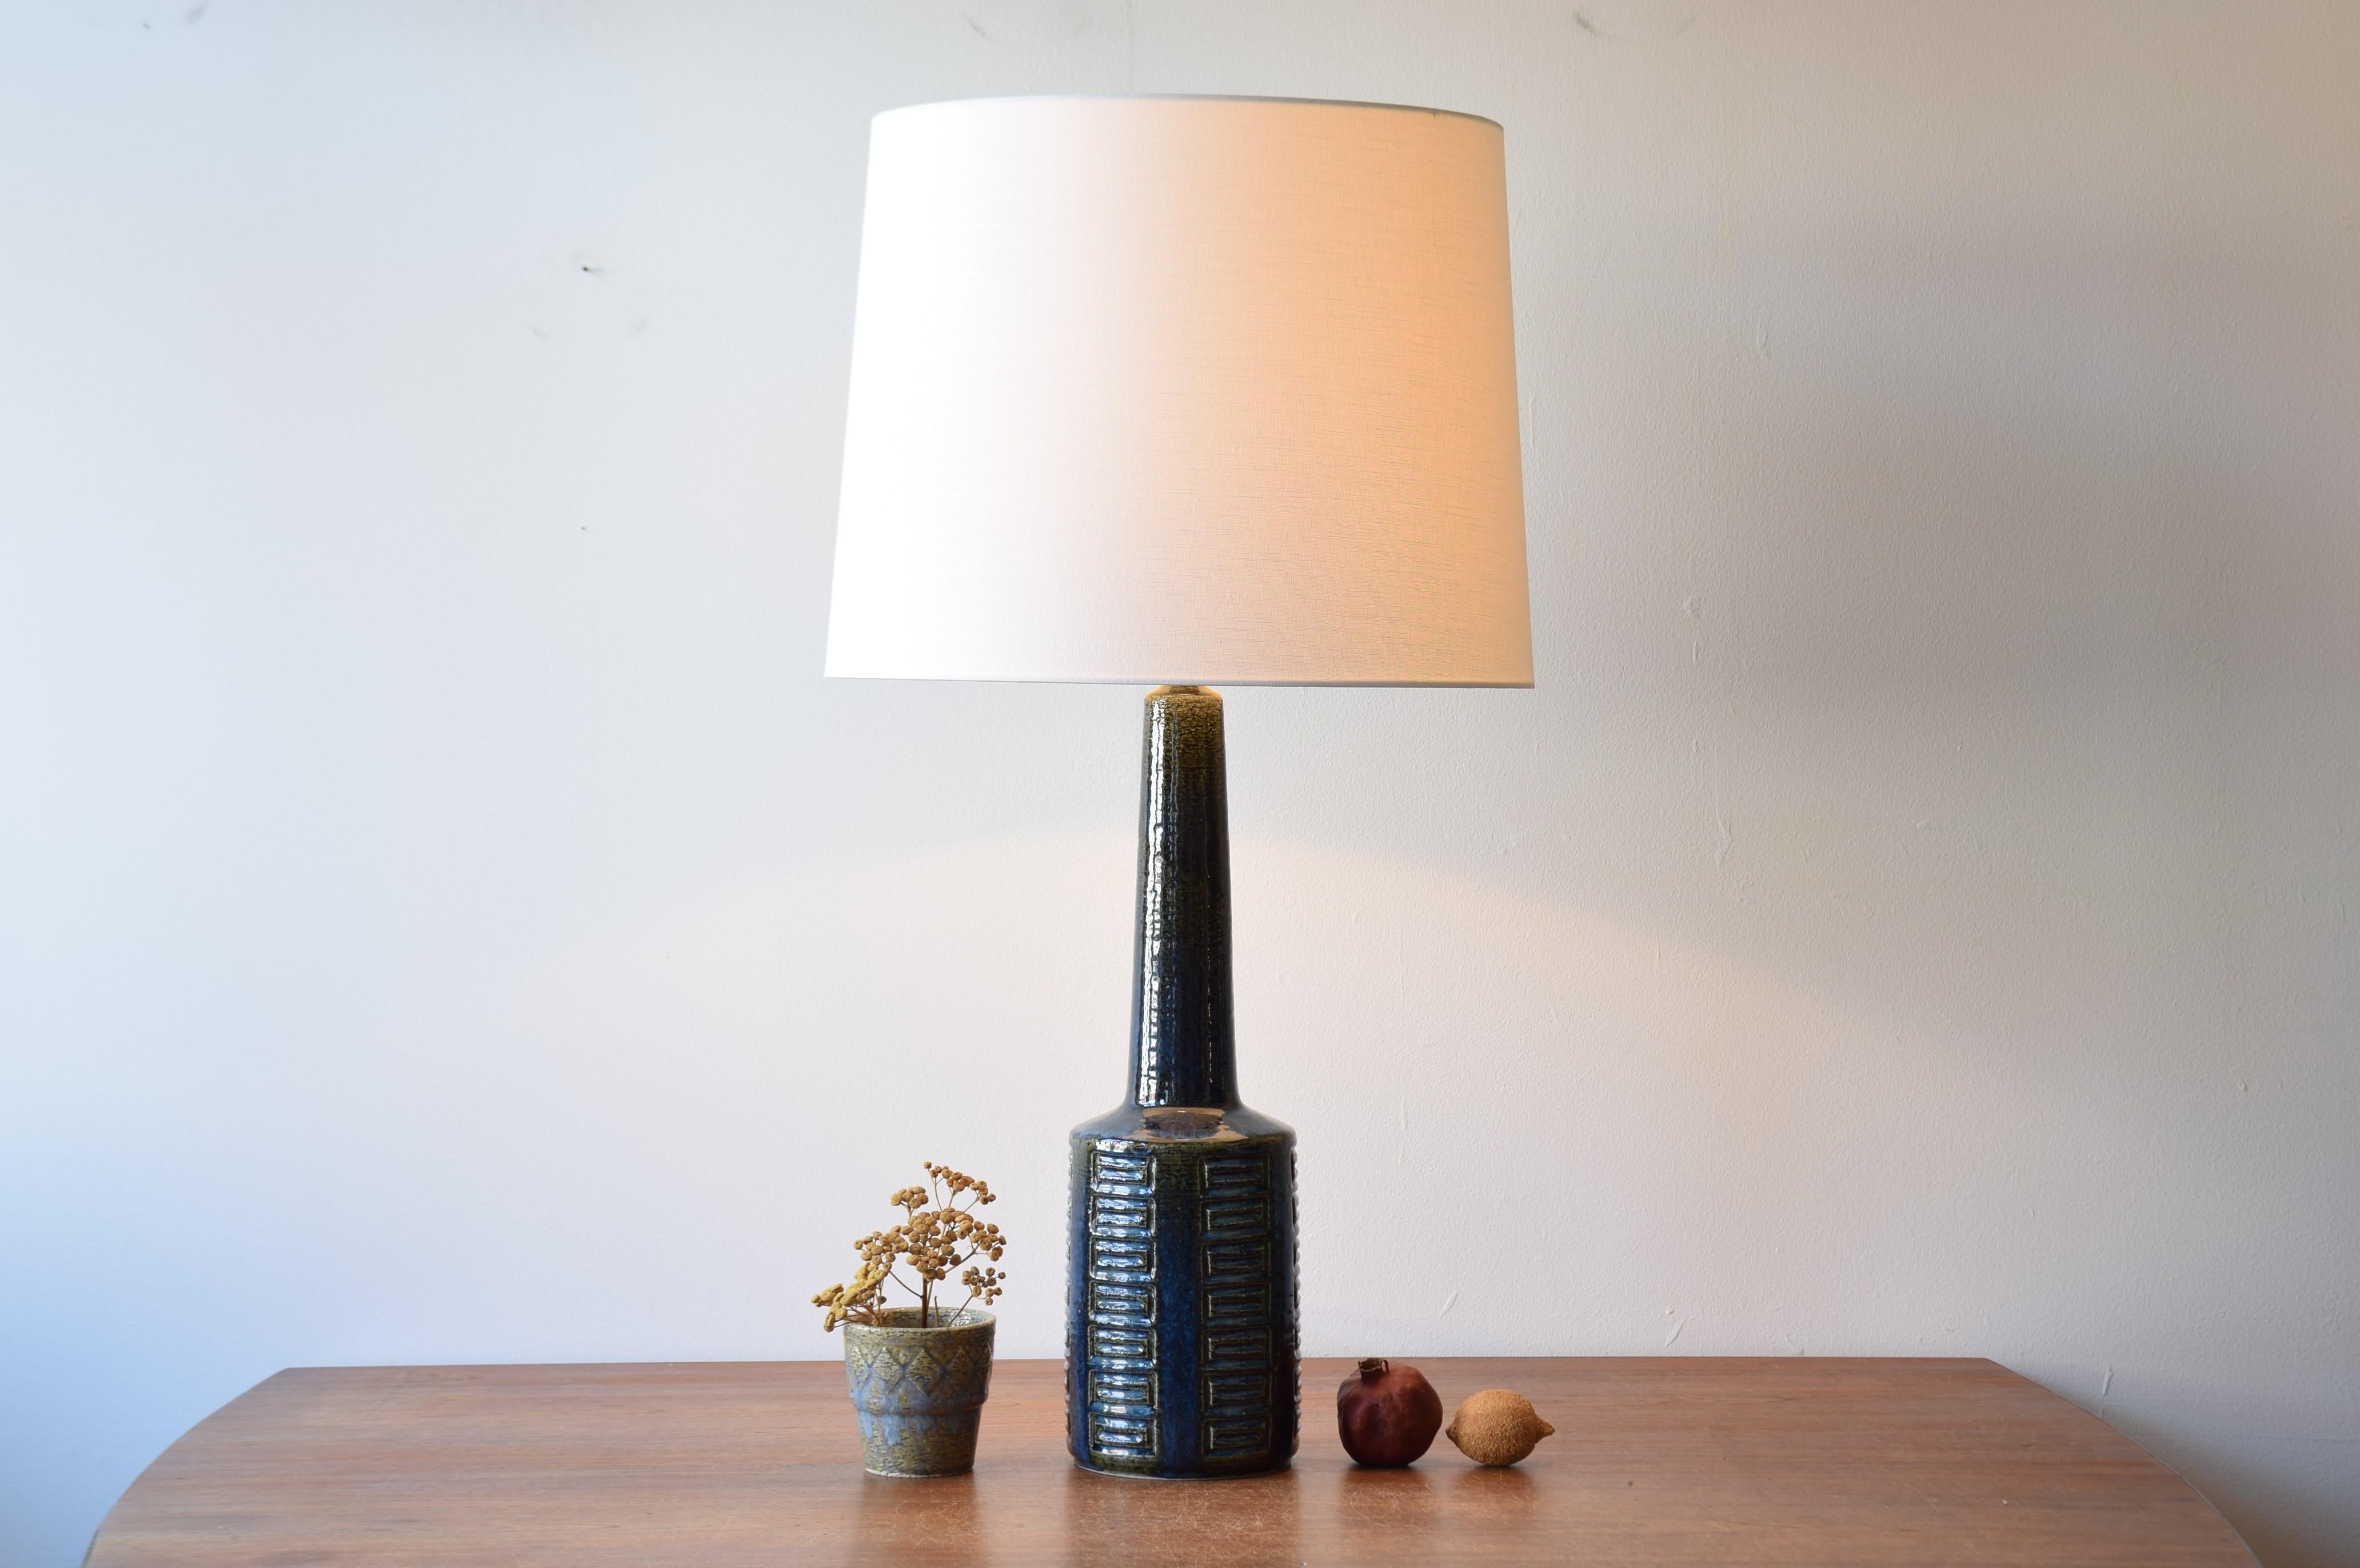 Very tall Danish Midcentury ceramic table lamp from Palshus including lamp shade.
The lamp was designed by Per Linnemann-Schmidt and manufactured circa 1960s or early 1970s.
It is made with chamotte clay which gives a rough and vivid surface. The